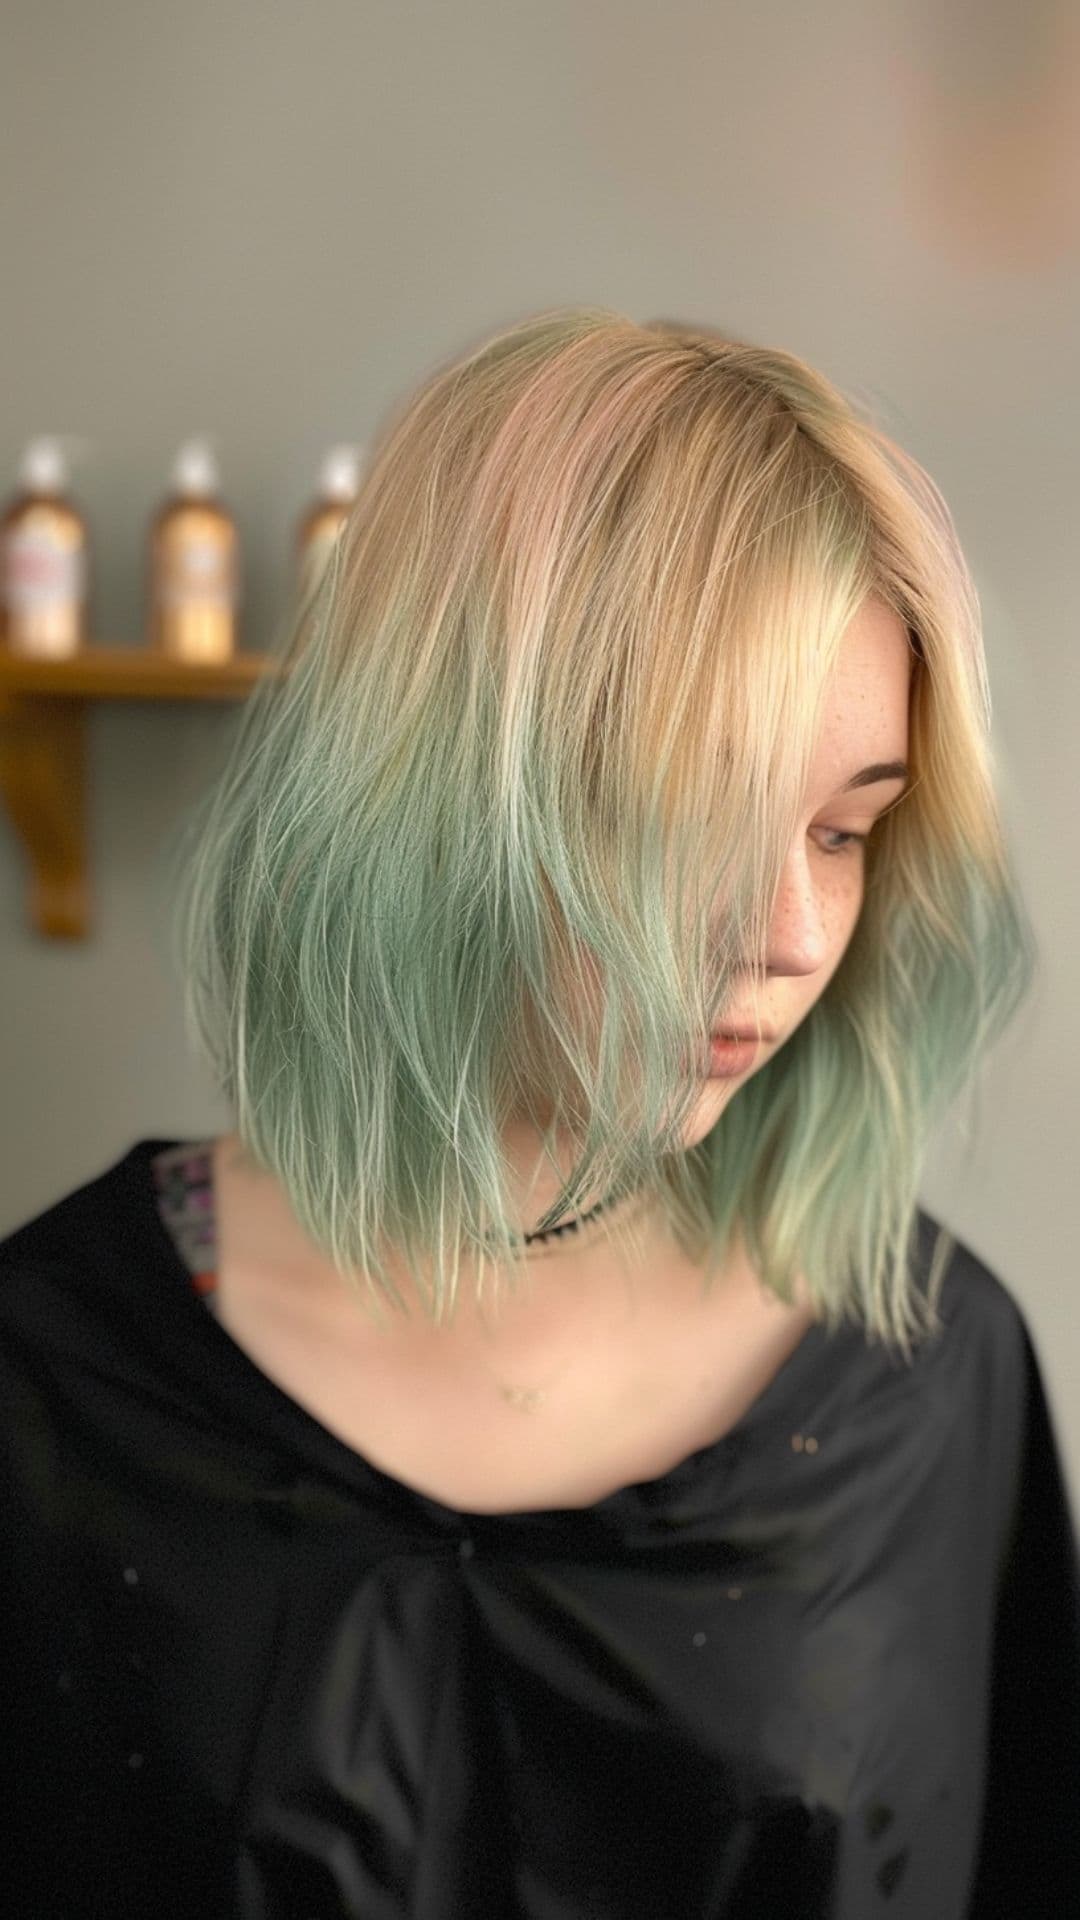 A woman modelling a pastel green hair ombre.